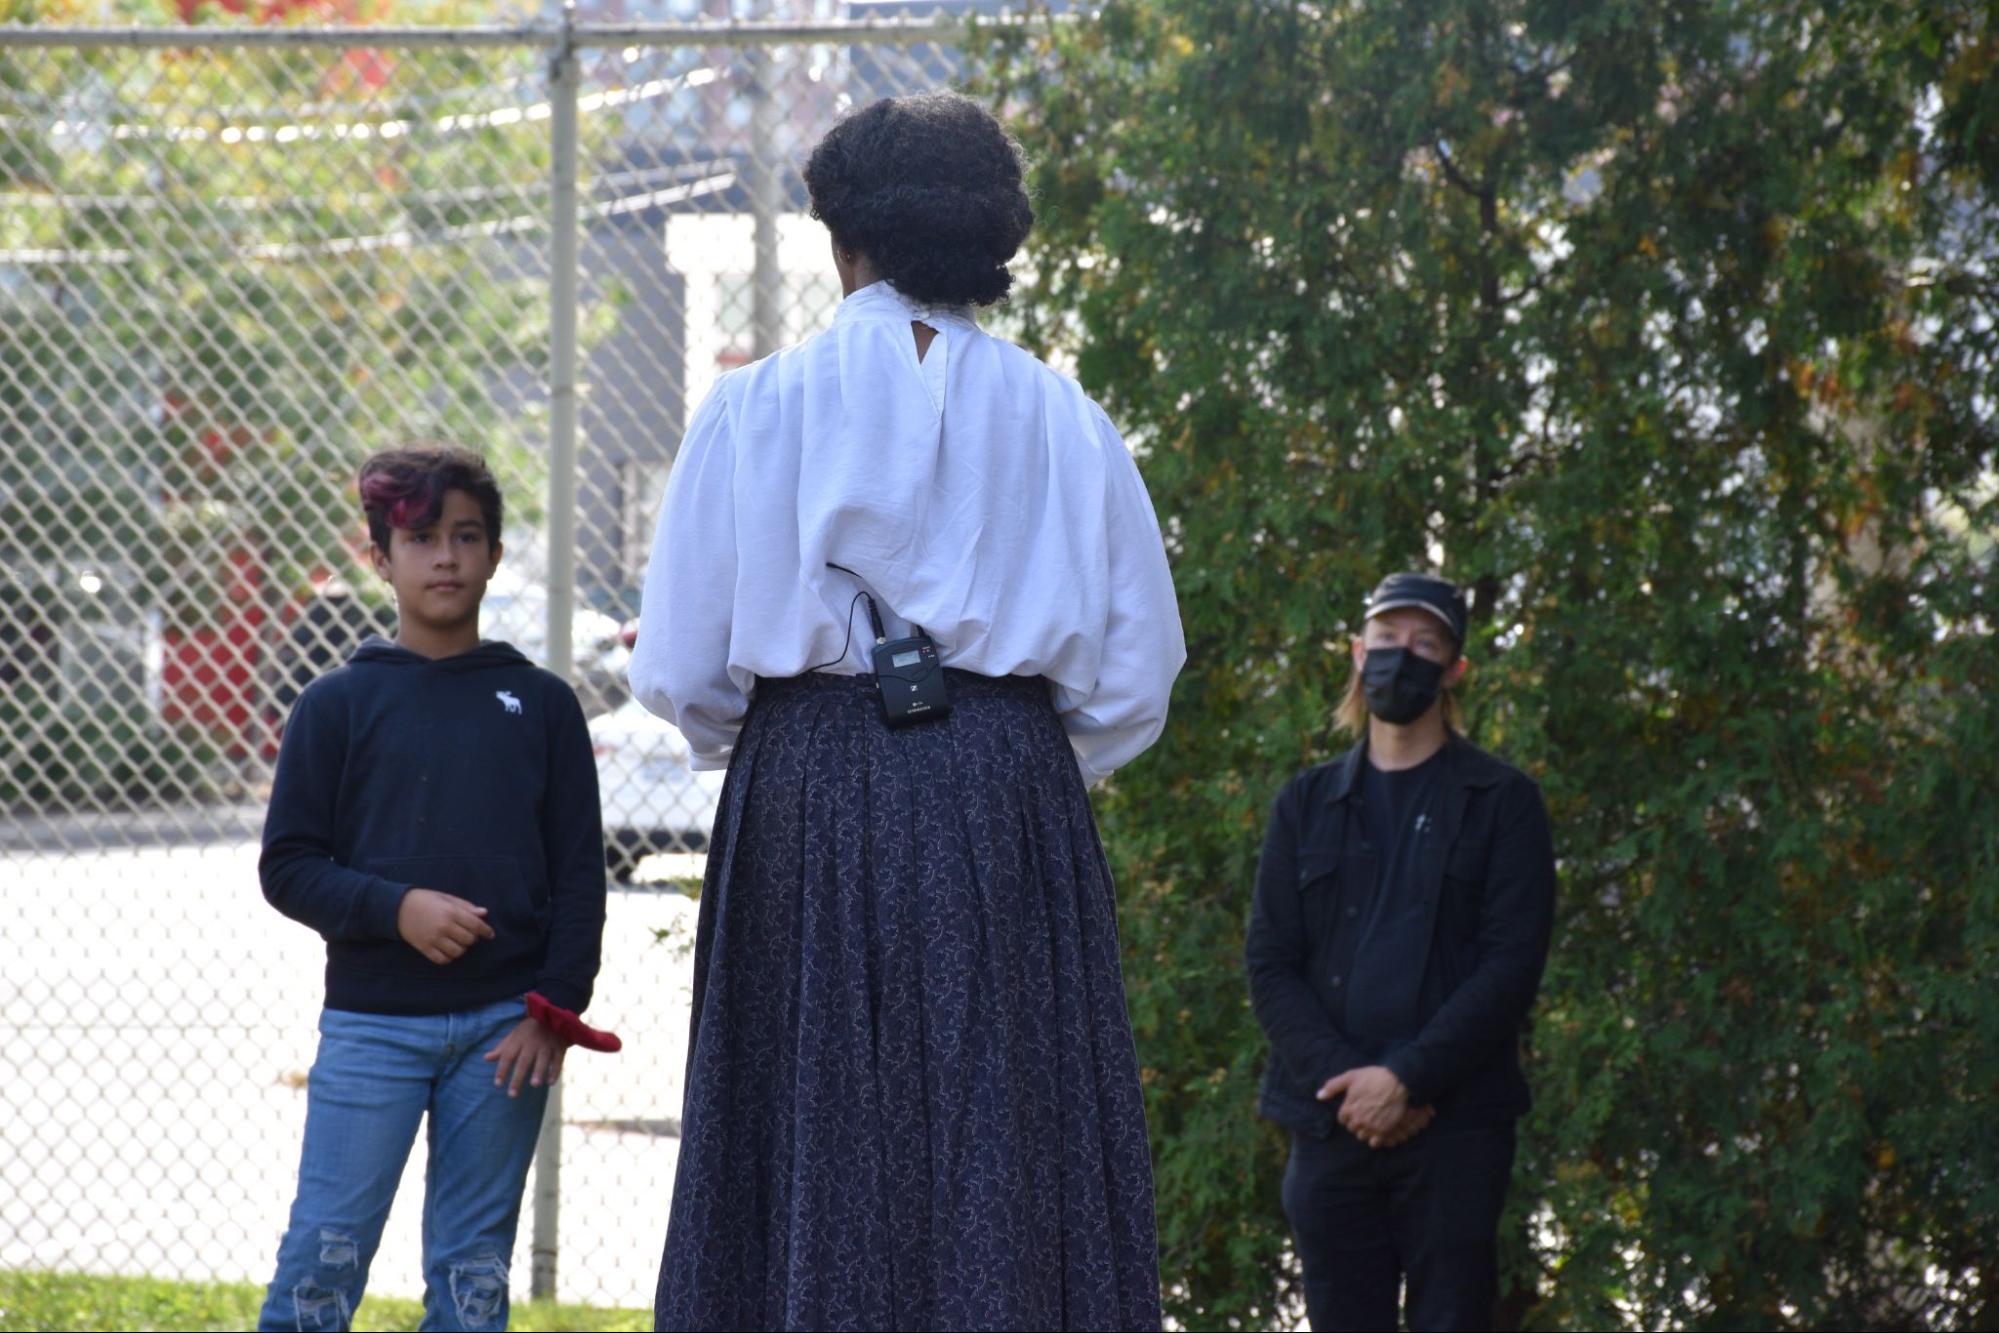 Photo of Charmaine Lurch turned around, talking to two people, she is wearing a dark skirt, white shirt. There is a wire fence and greenery in the background.